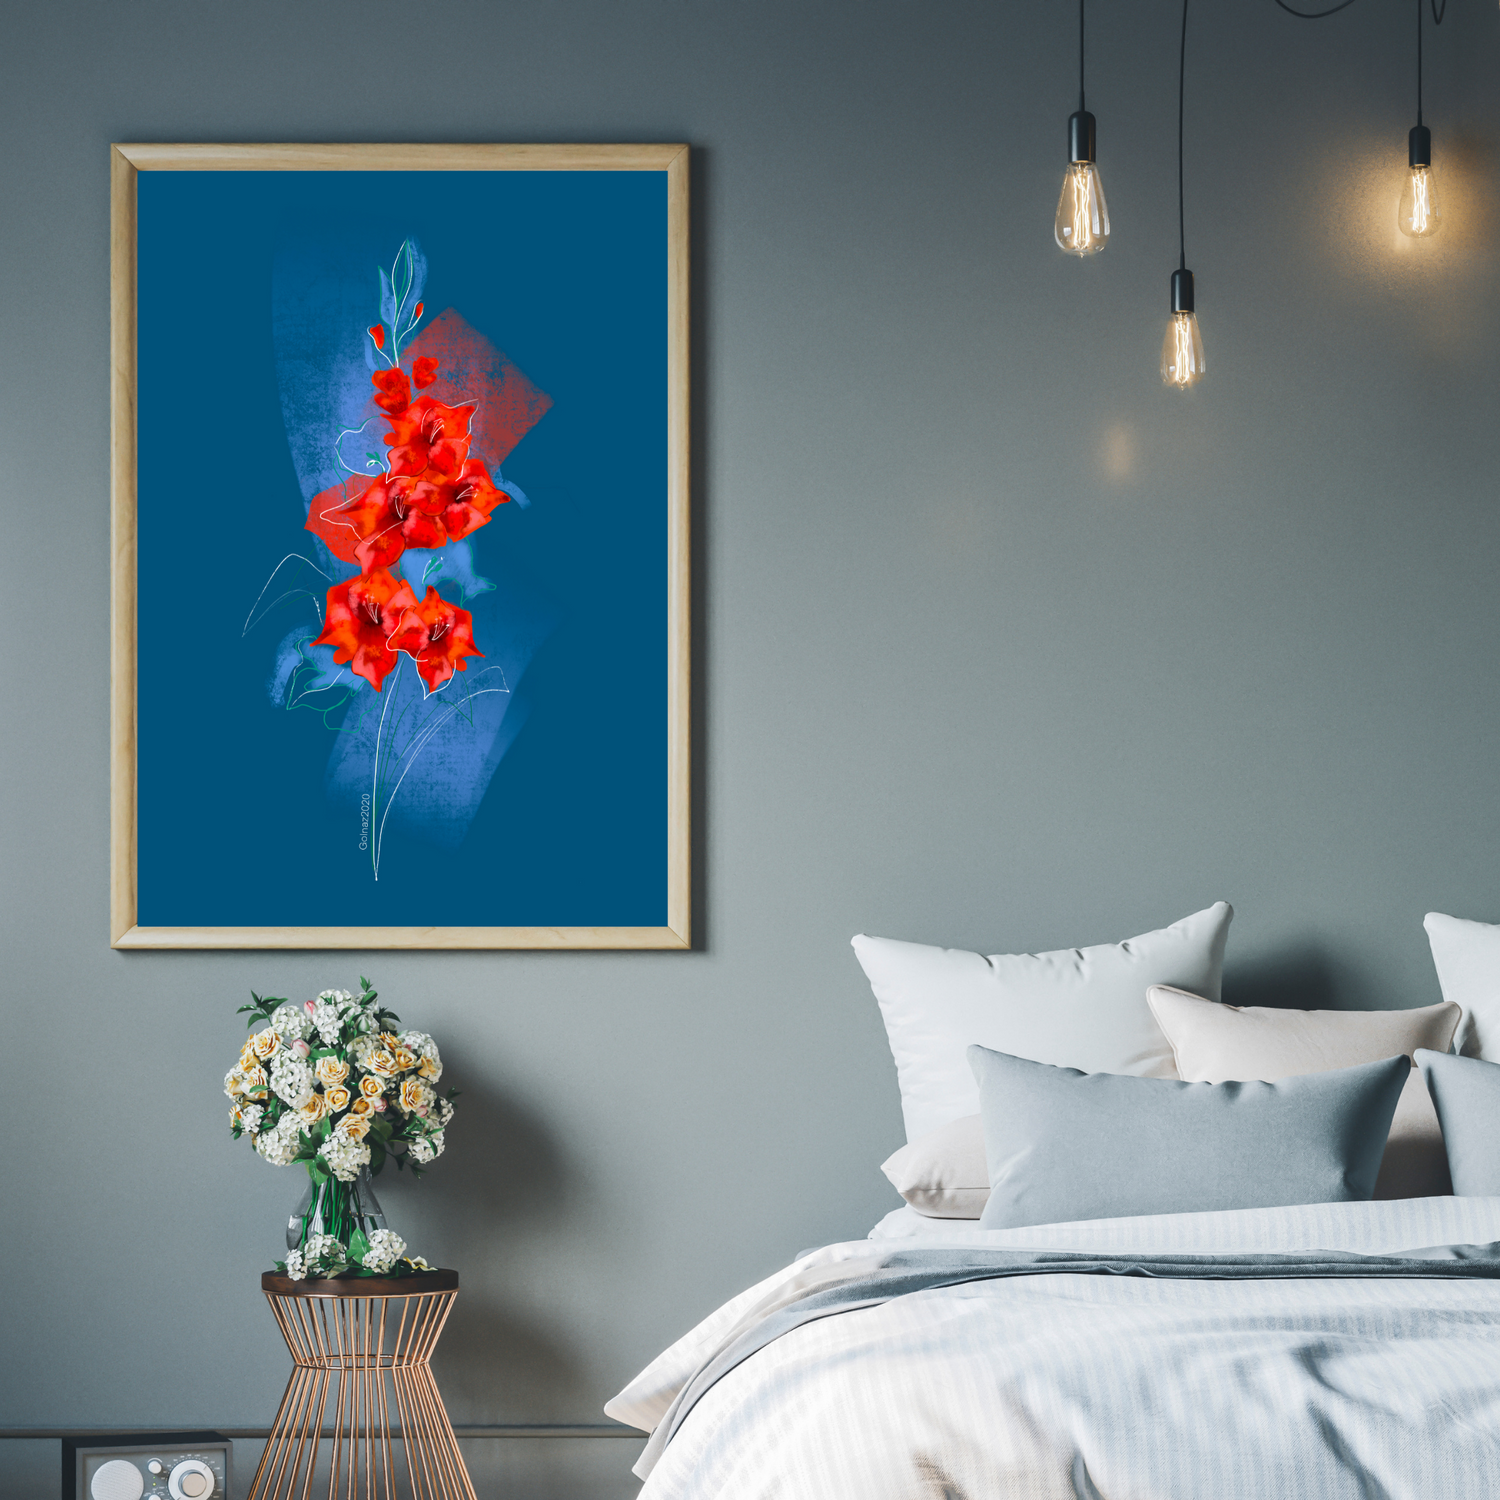 An example of the Gladiolus painting by ArisaTeam in a bedroom